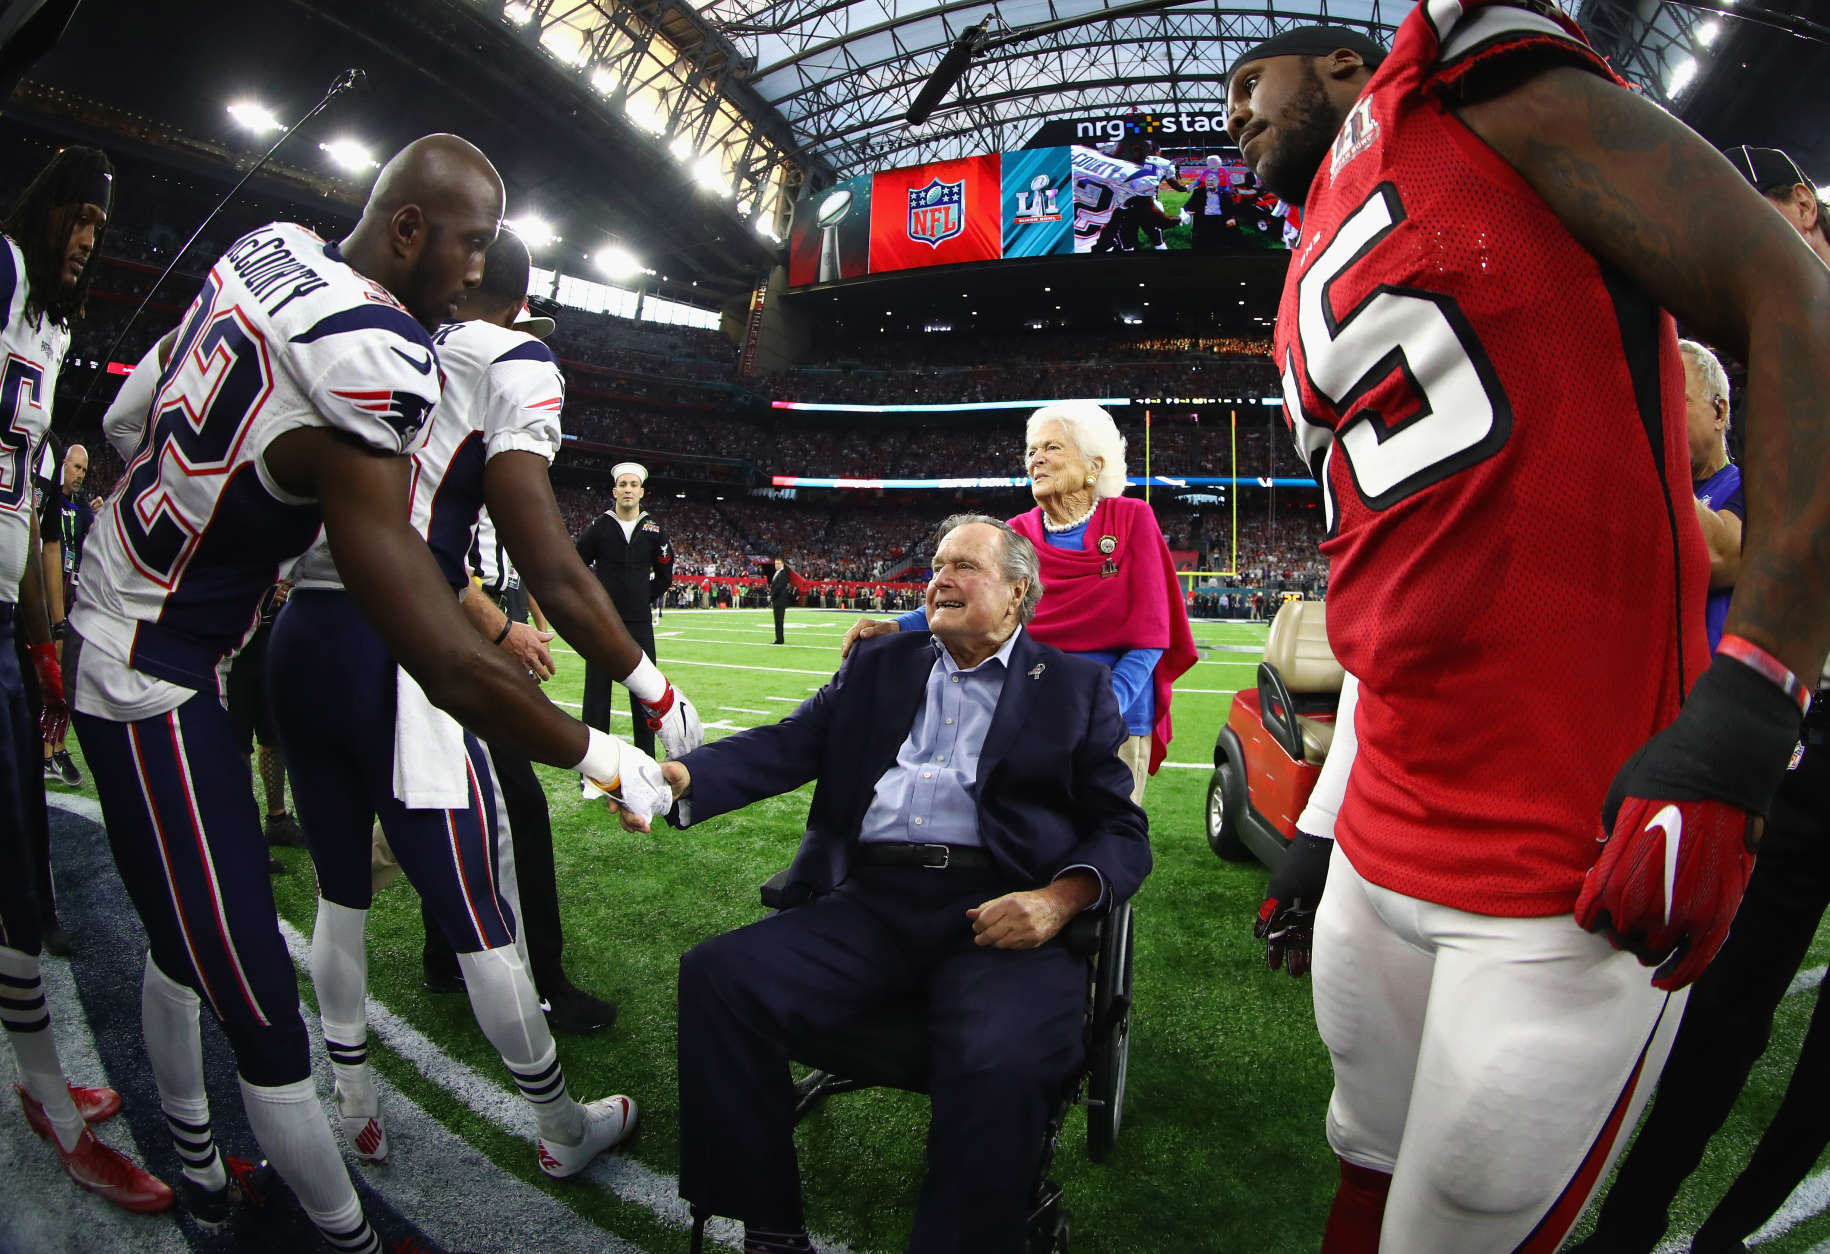 HOUSTON, TX - FEBRUARY 05:  President George H.W. Bush and Barbara Bush arrives for the coin toss prior to Super Bowl 51 between the Atlanta Falcons and the New England Patriots at NRG Stadium on February 5, 2017 in Houston, Texas.  (Photo by Al Bello/Getty Images)